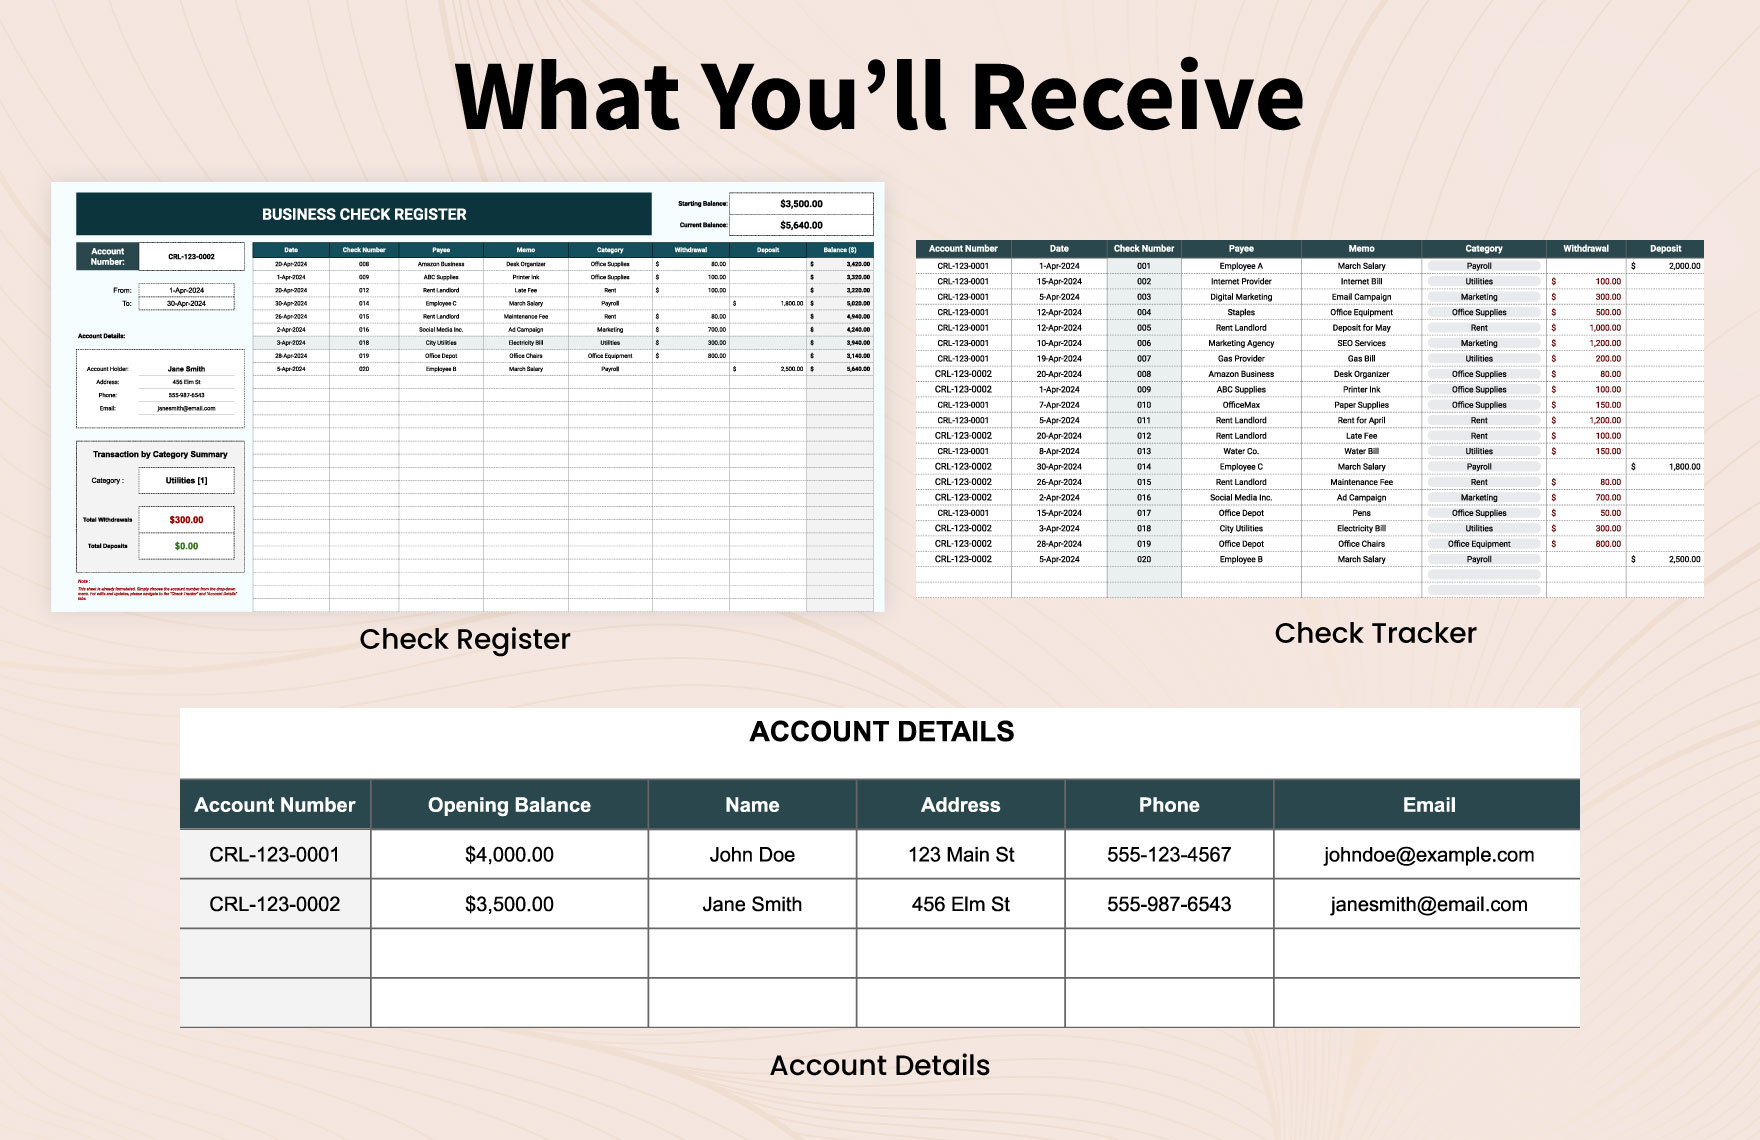 Business Check Register Template